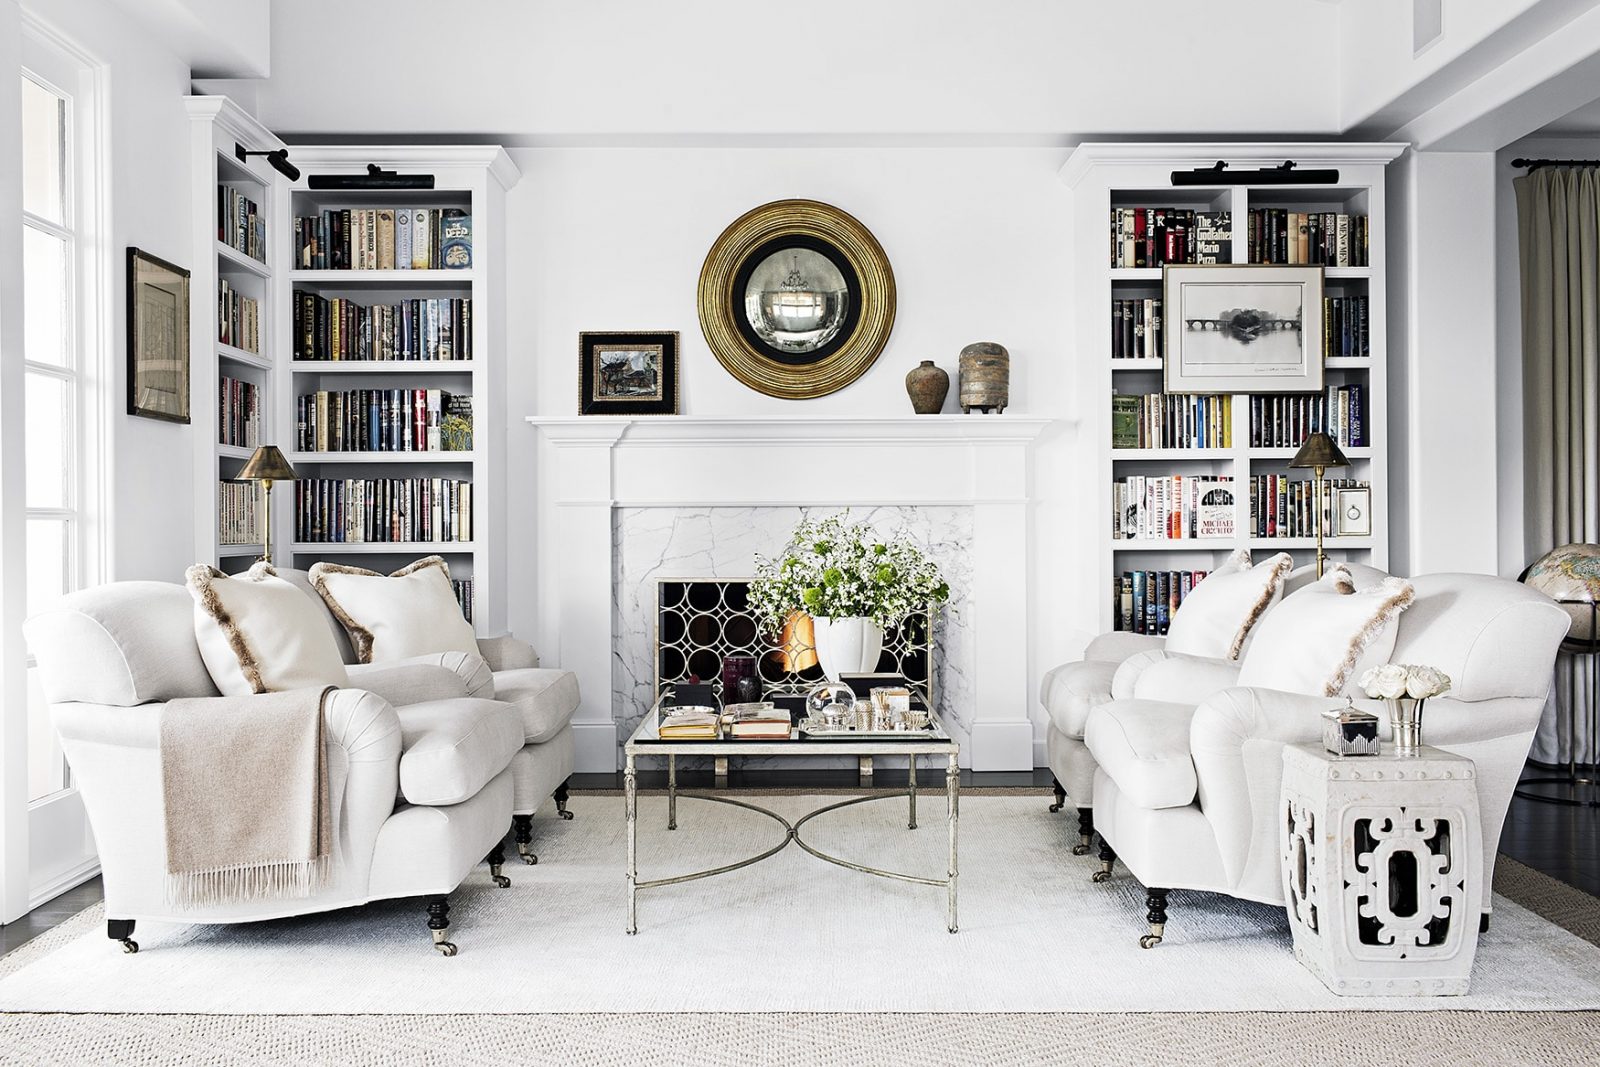 17 Fabulous Ideas Of Fireplace With, Bookshelves Either Side Of Fireplace